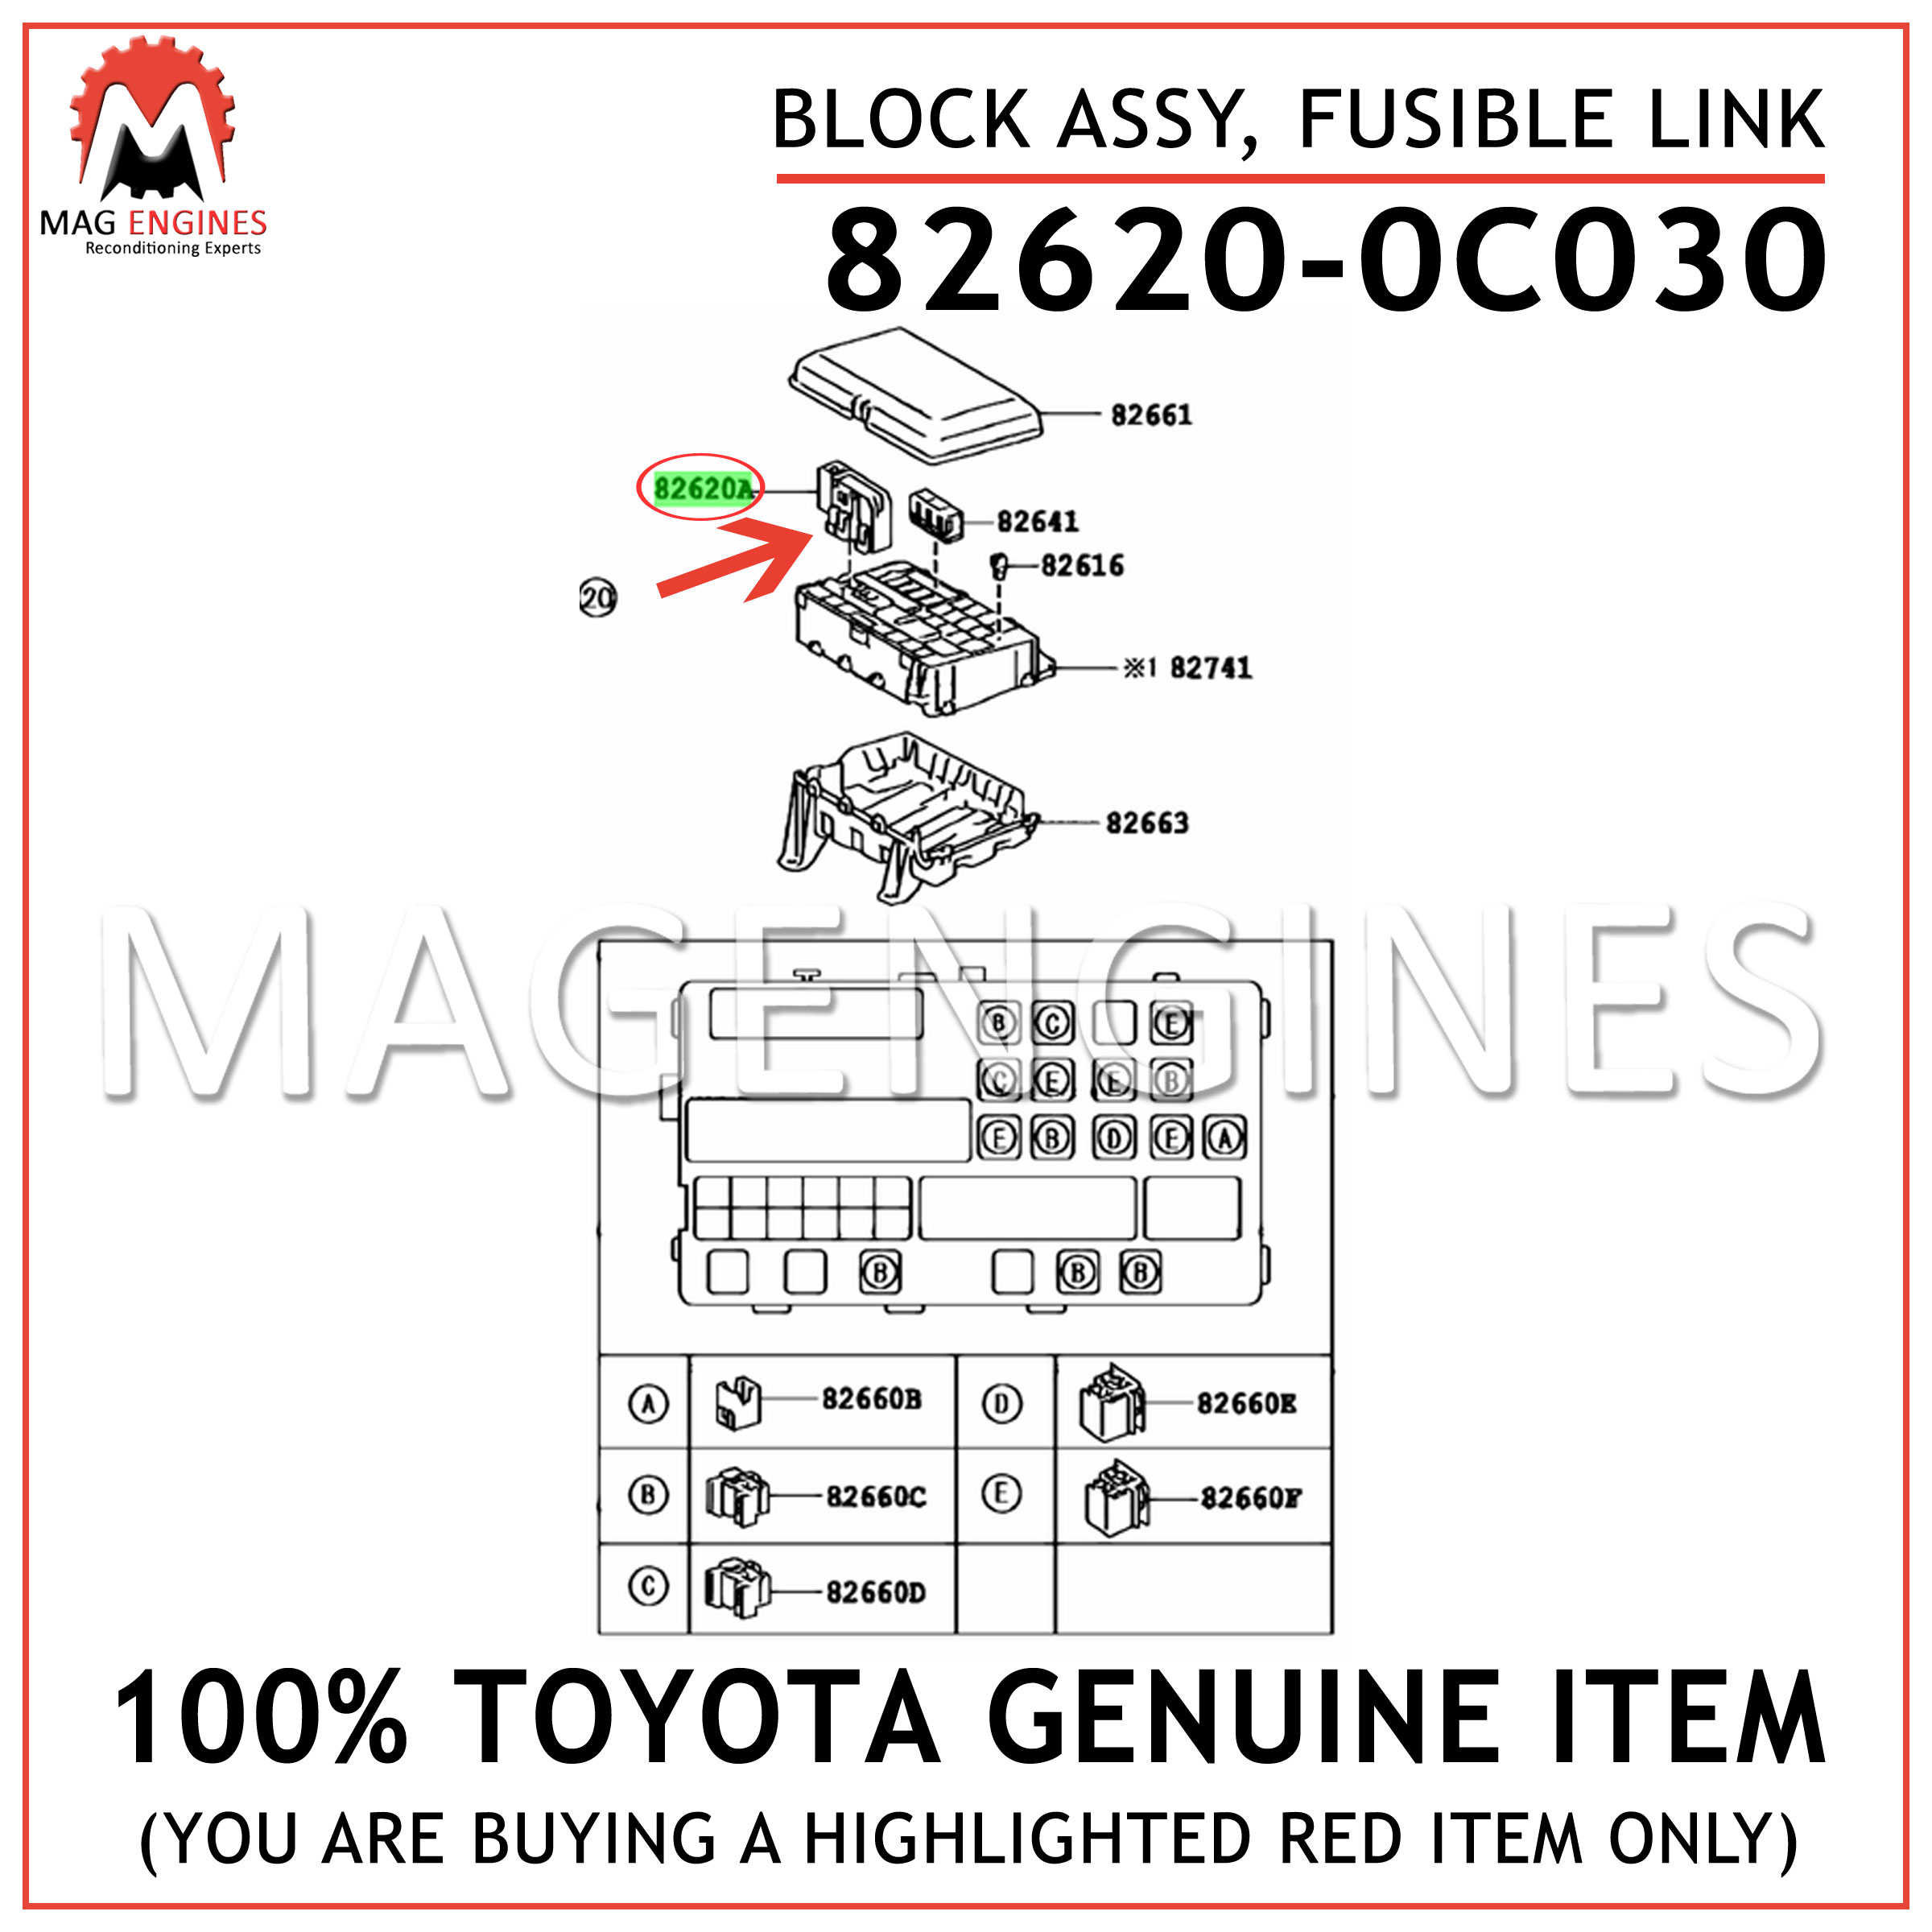 NEW 82620-0C030 Fusible Link Block Assembly for Tundra Sequoia LandCruiser LX vehicles 